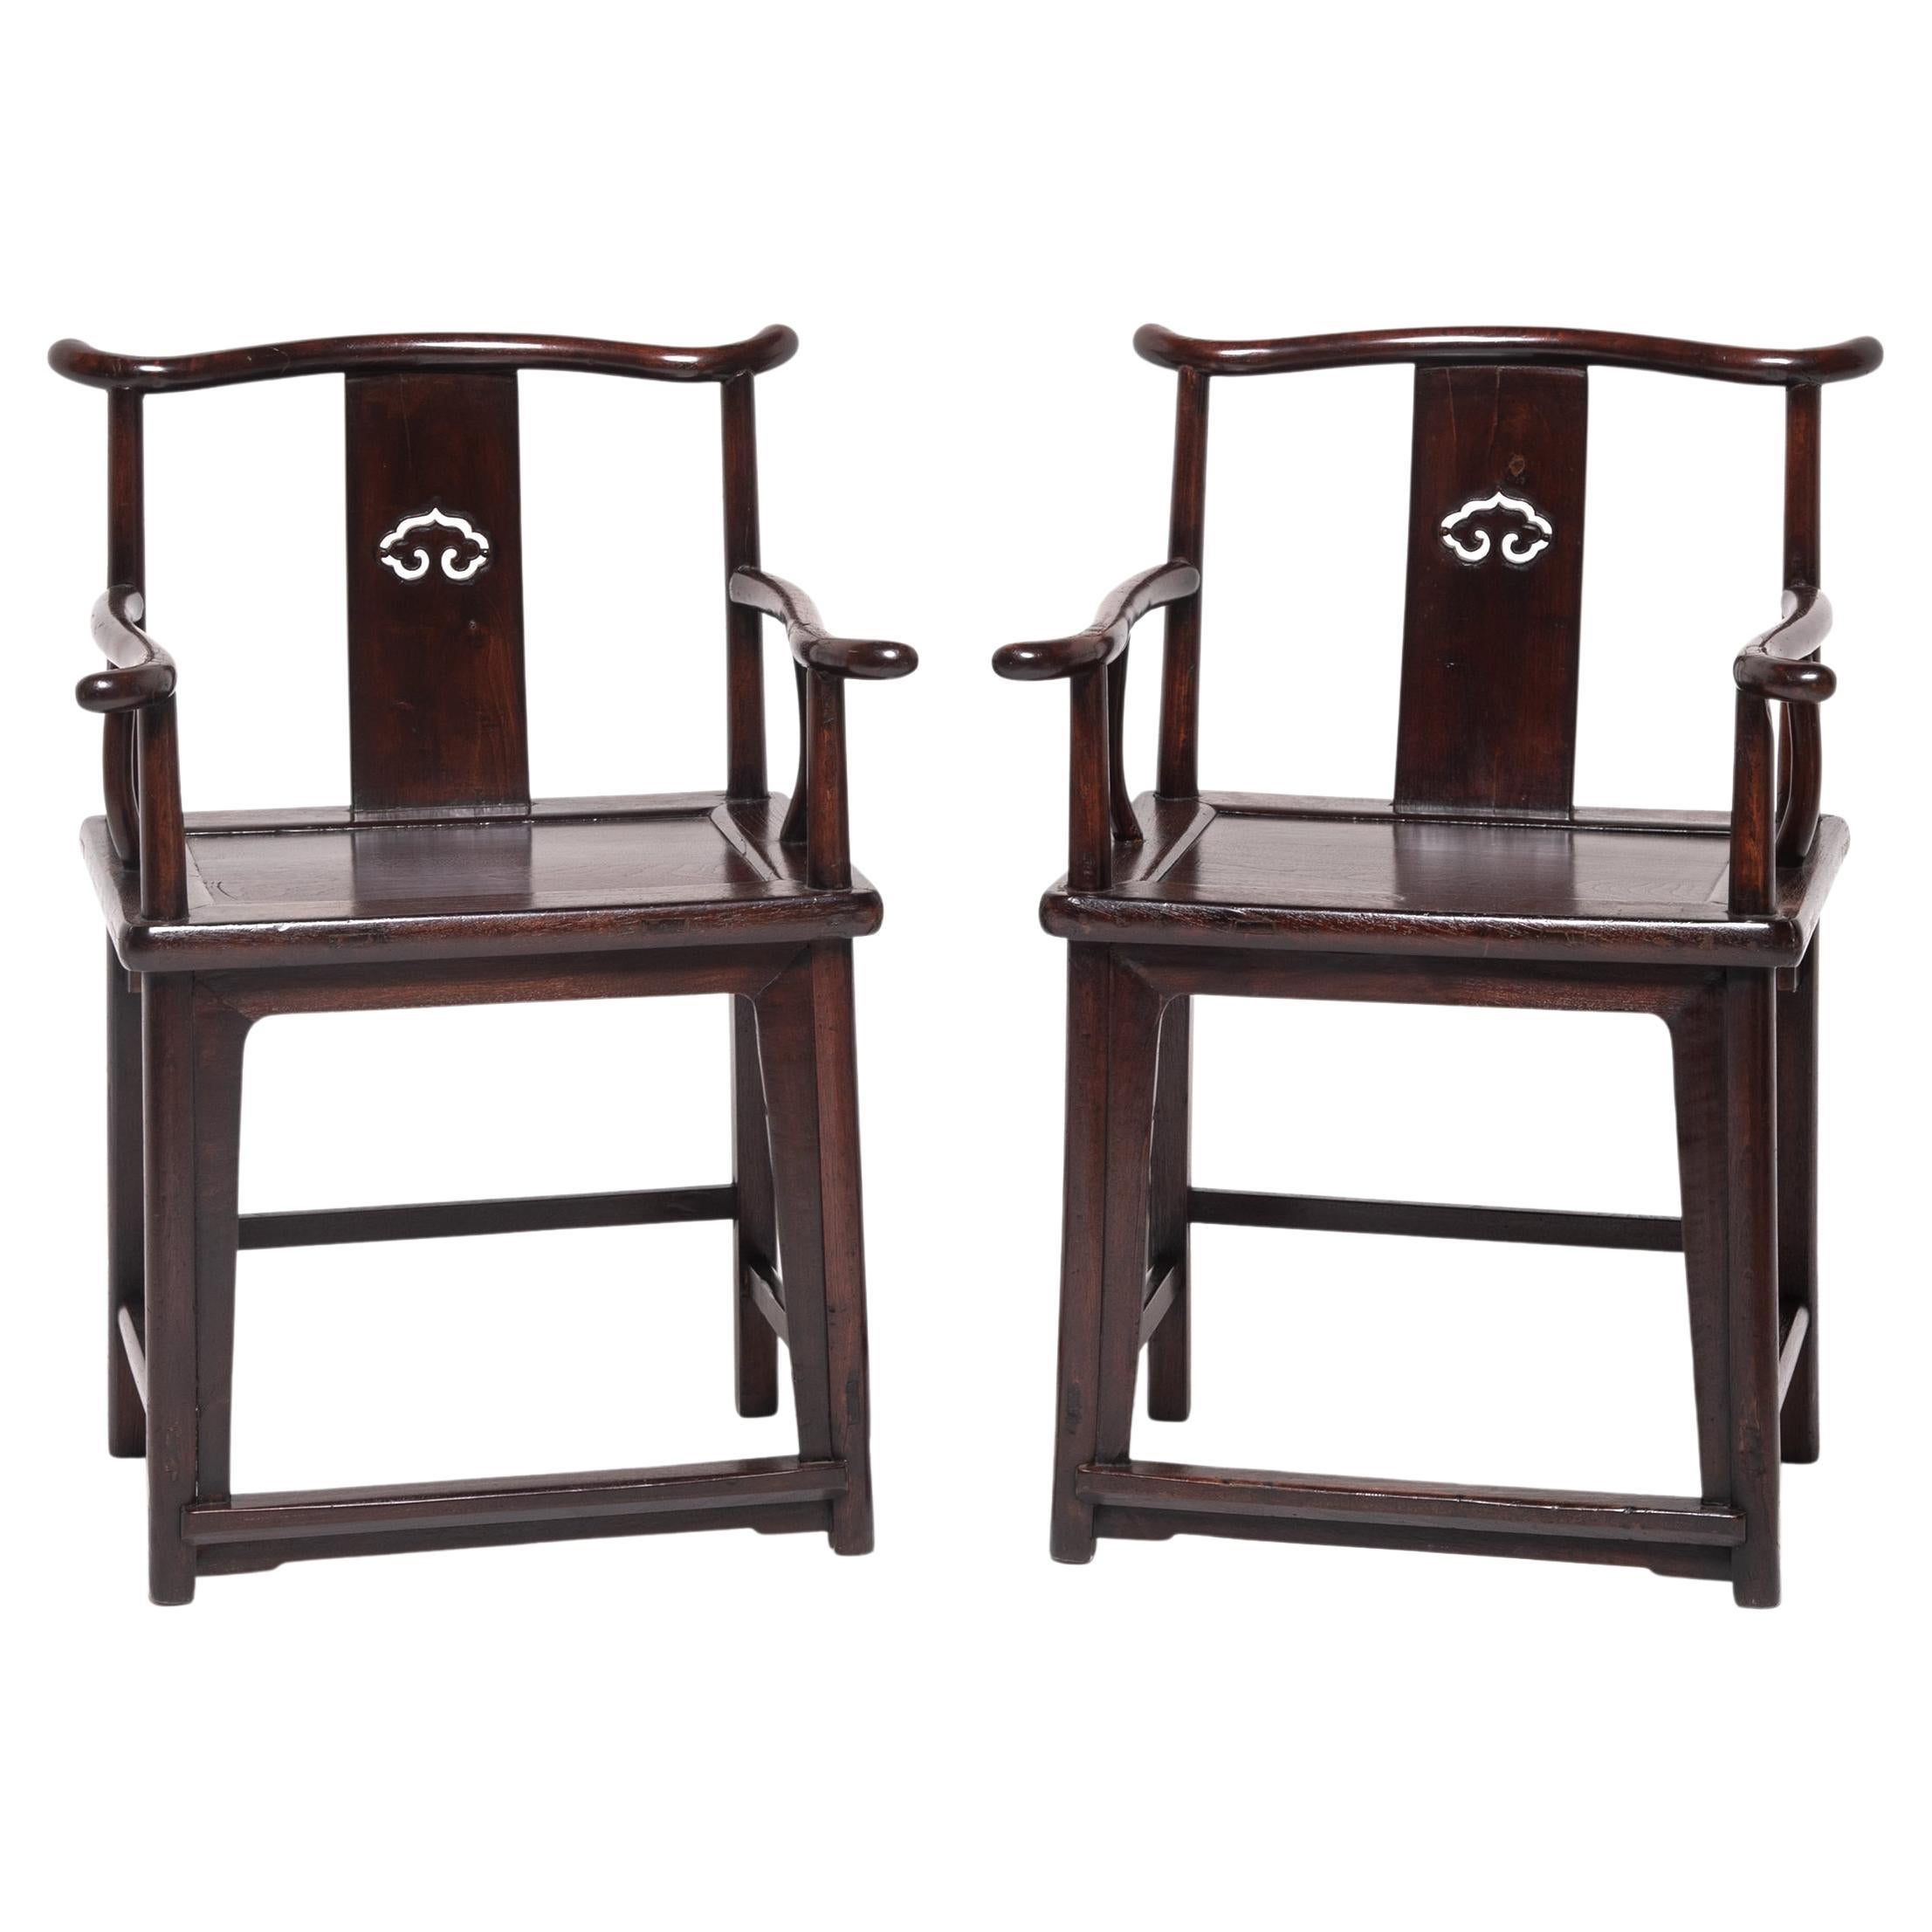 Pair of Chinese Low Back Official's Chairs, C. 1850 For Sale